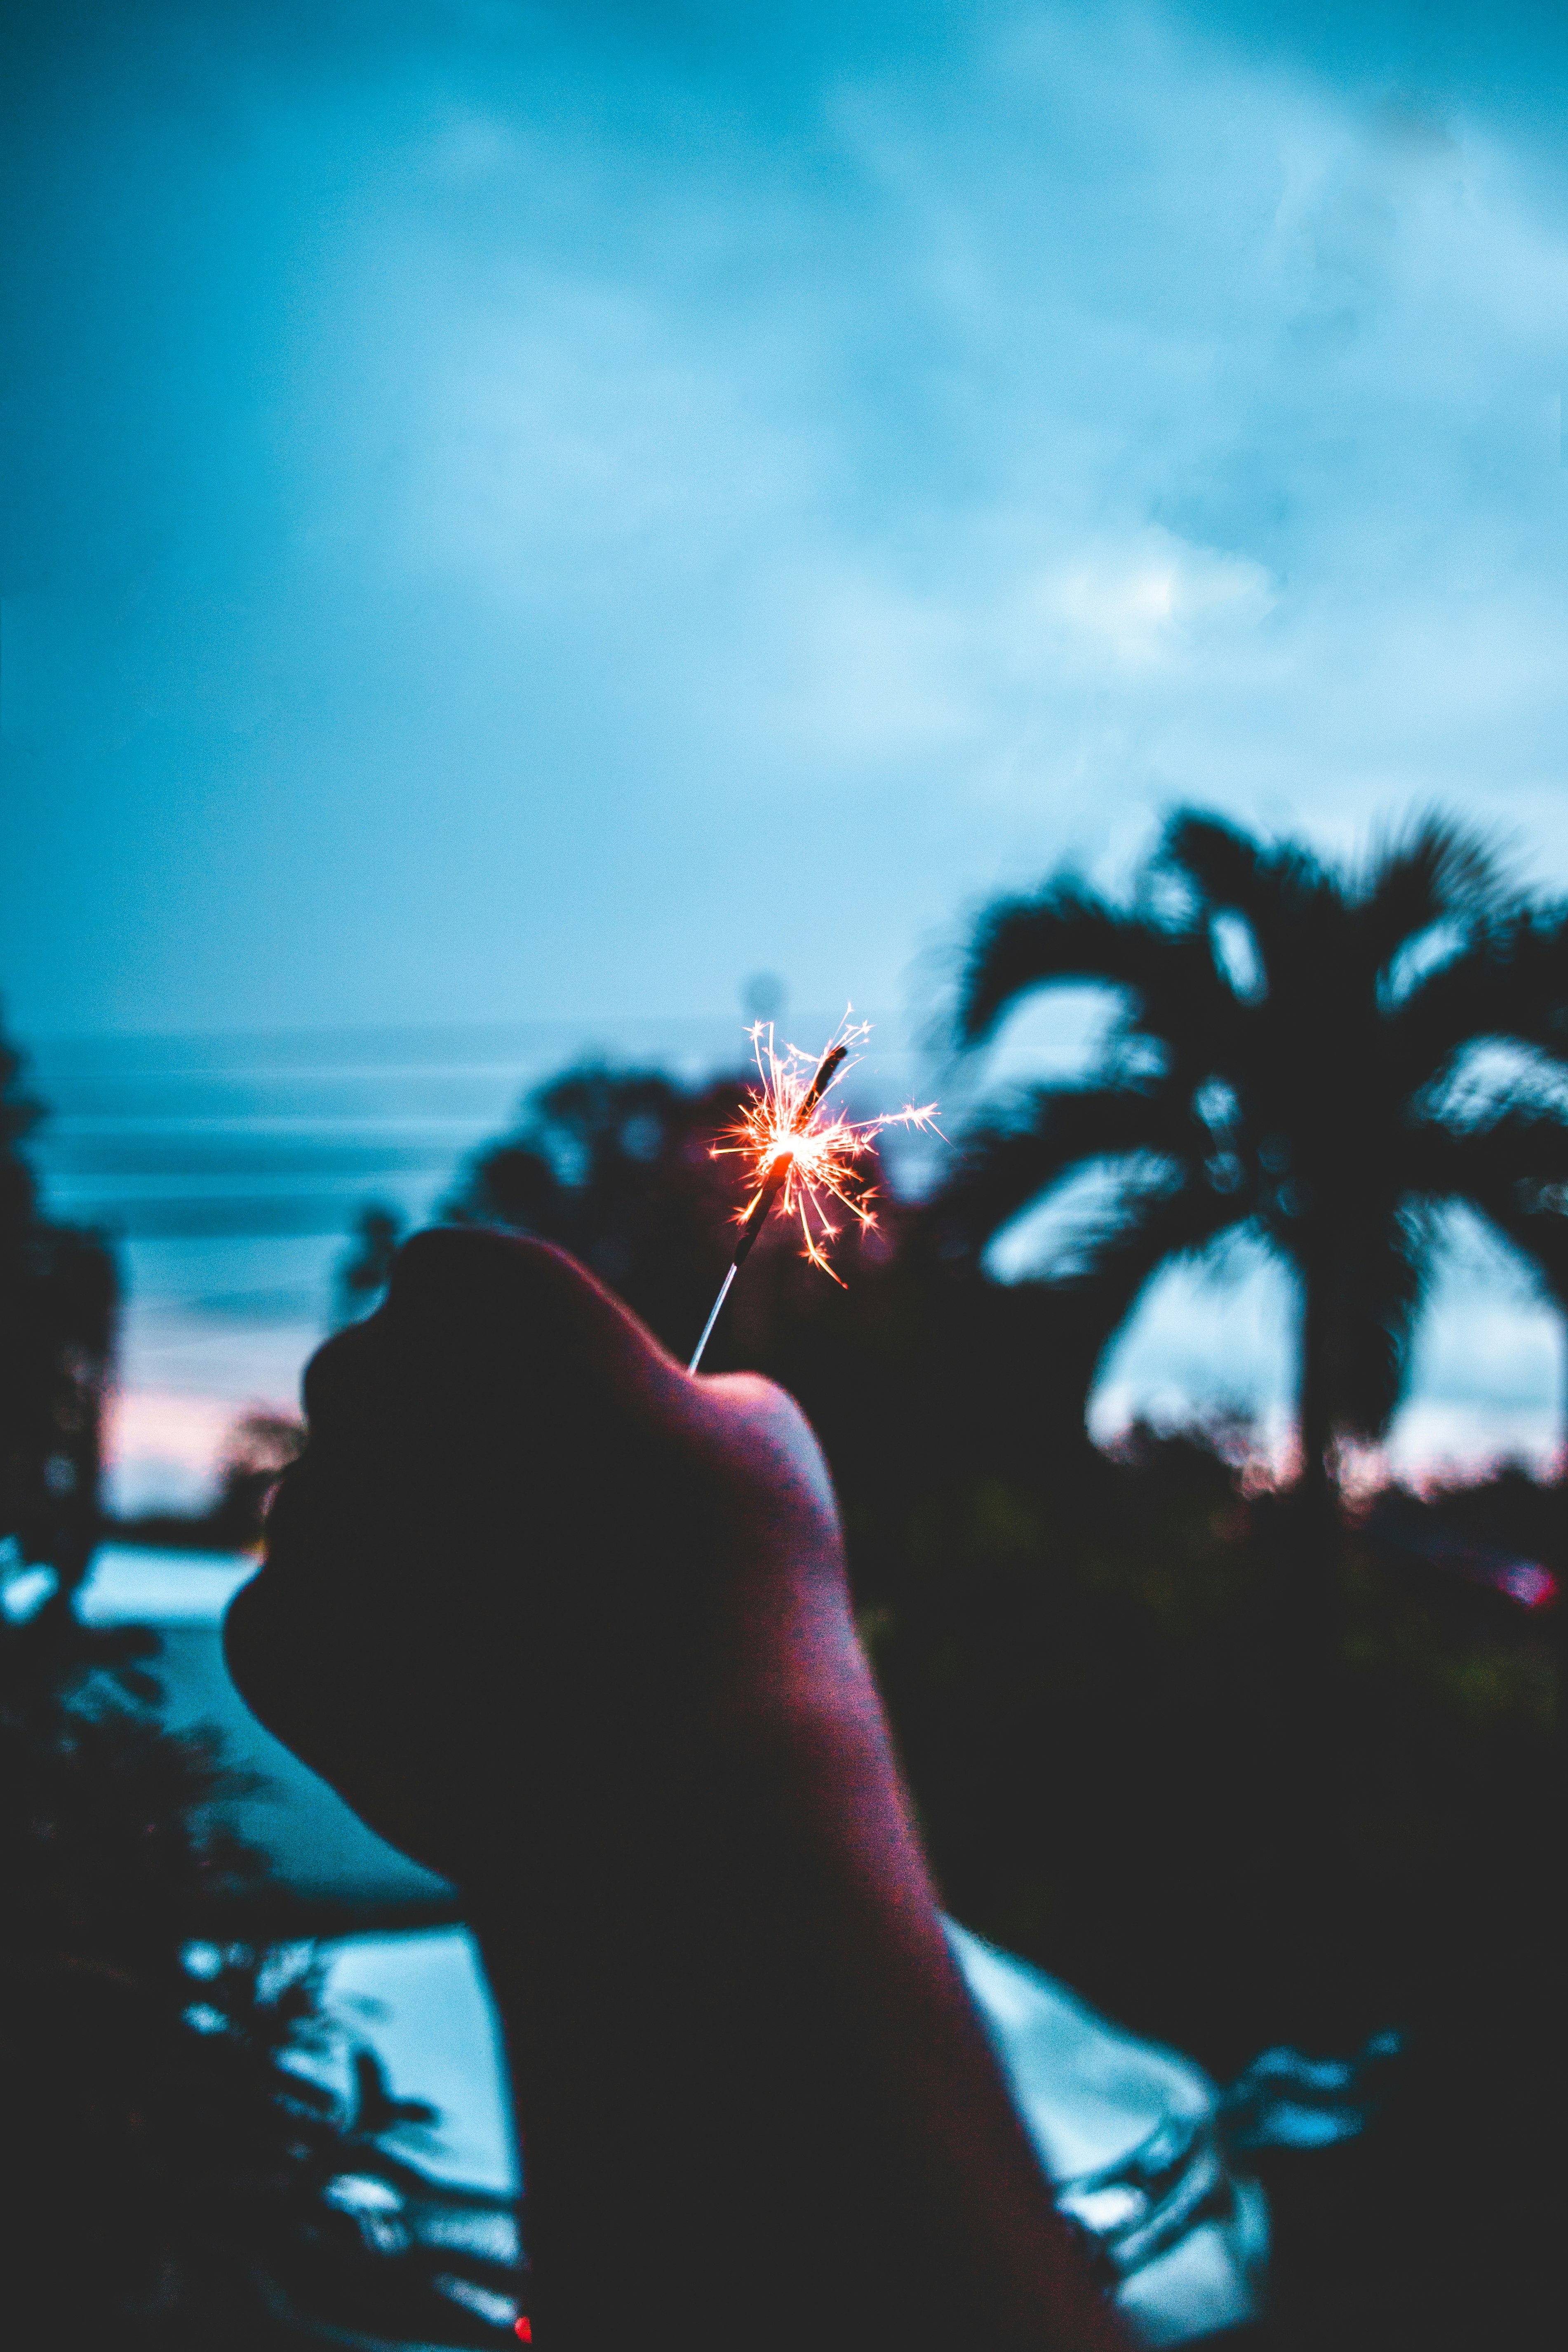 A person holding a lit sparkler in the air.